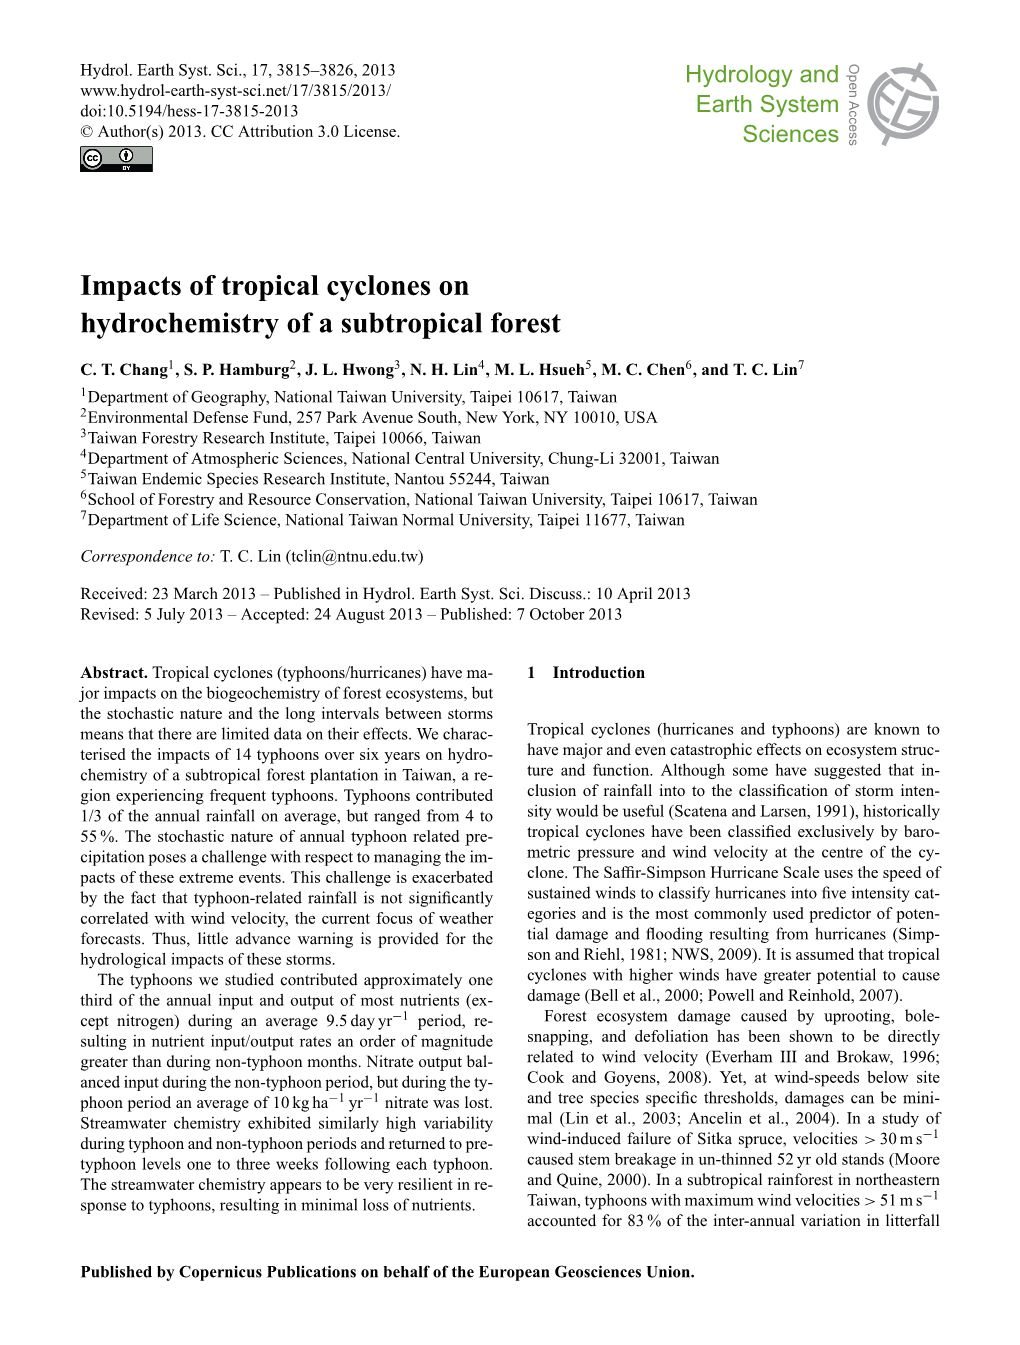 Impacts of Tropical Cyclones on Hydrochemistry of a Subtropical Forest